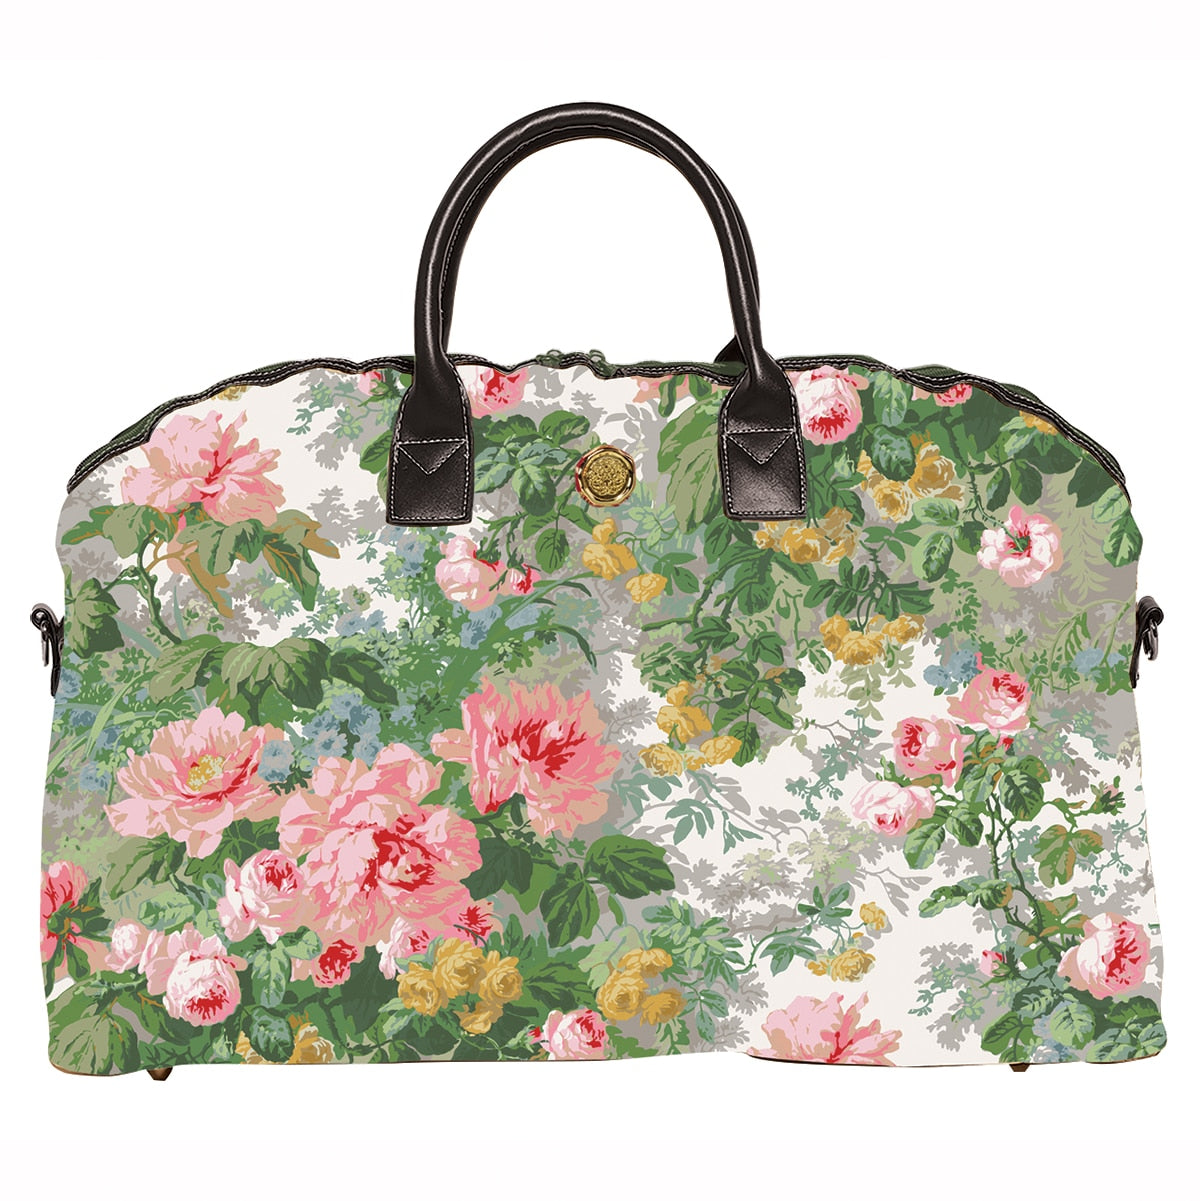 A Virginia Duffle Bag, pink and white floral print.